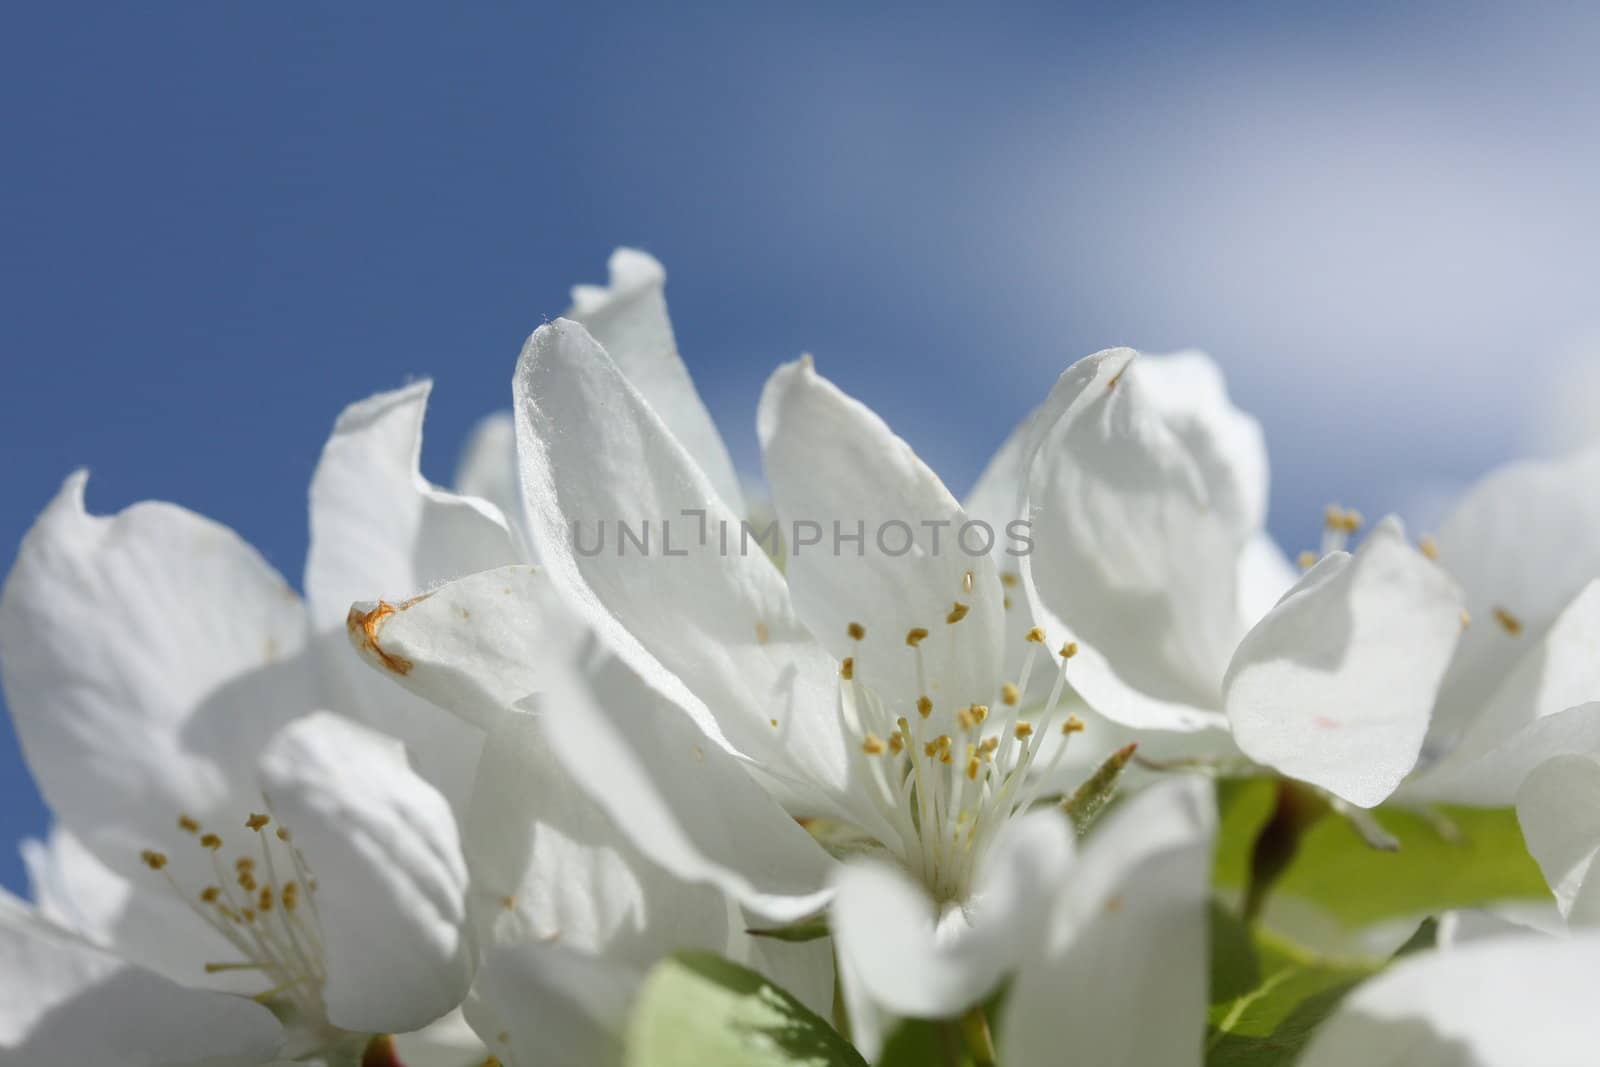 a close up view of apple blossoms against a blue sky